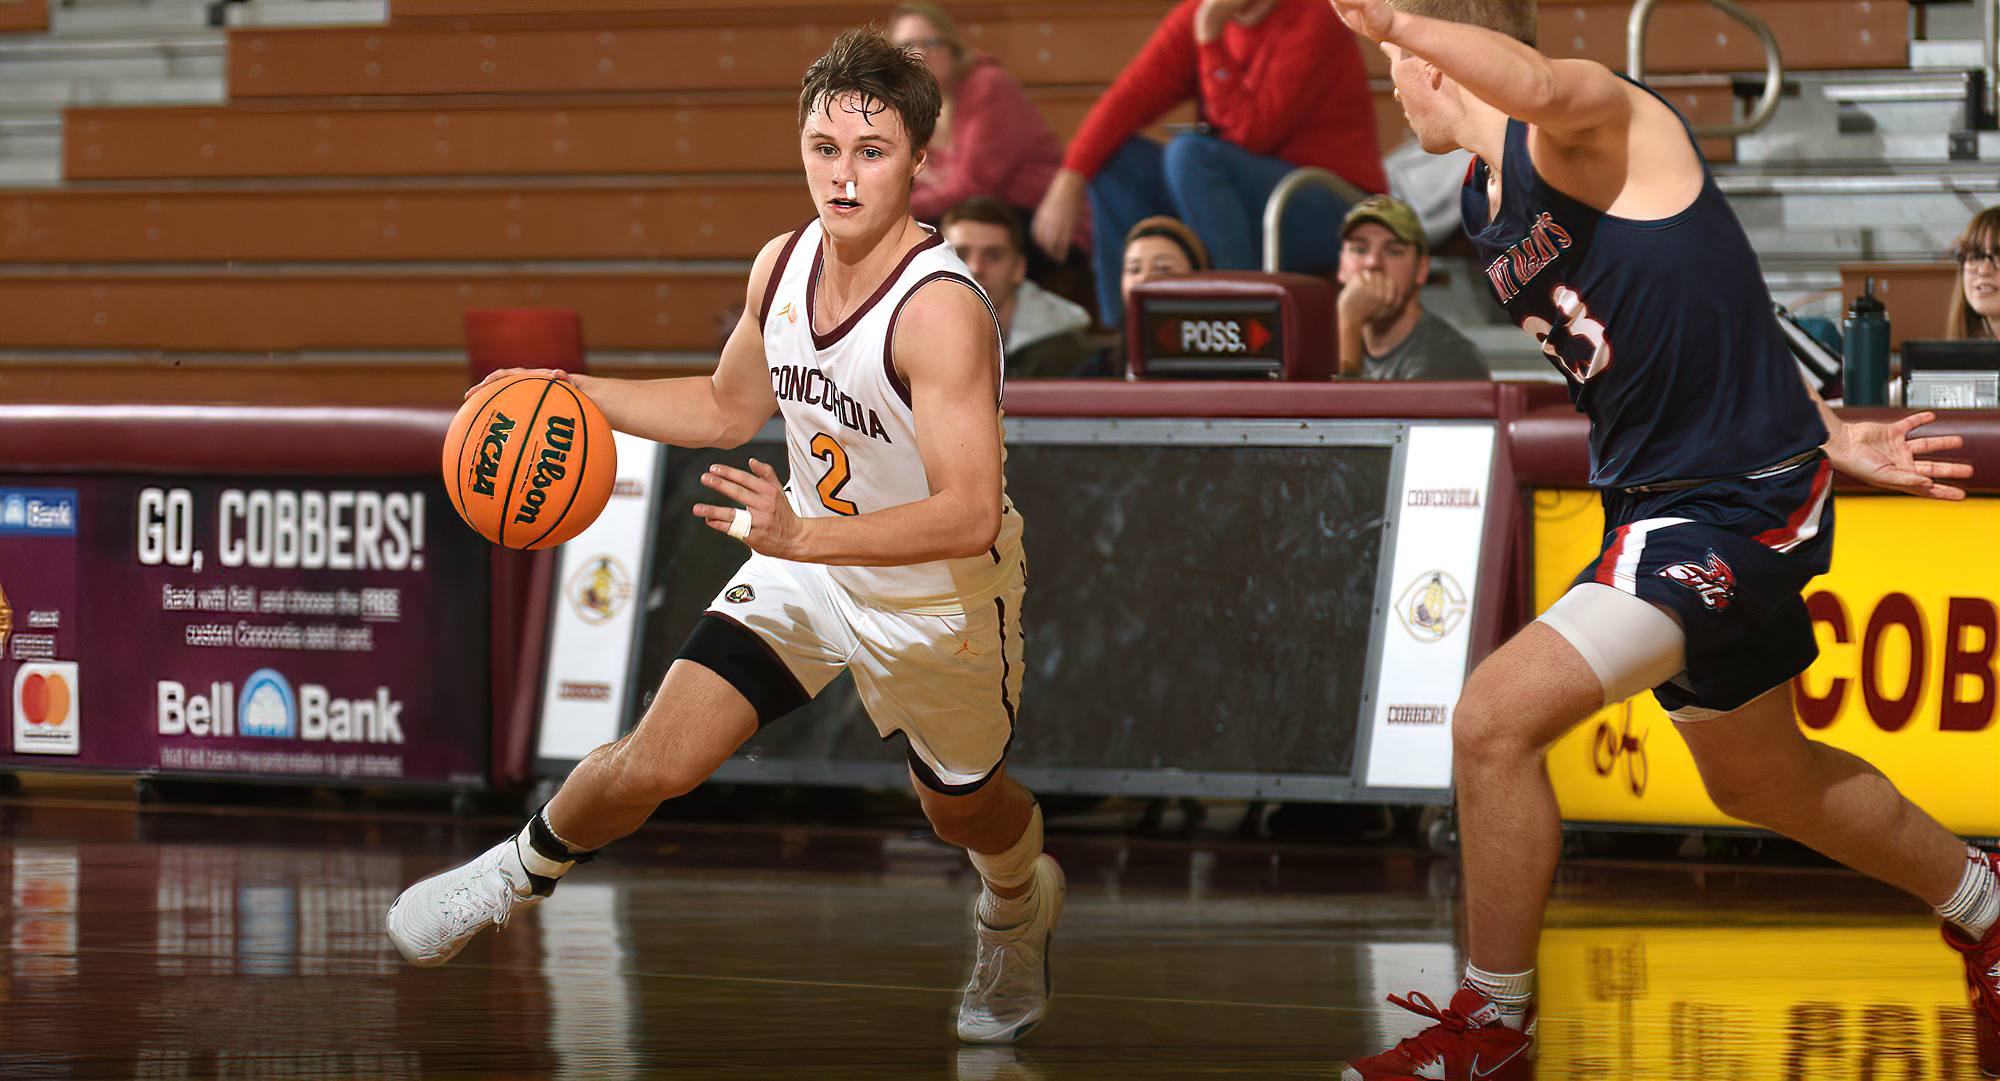 Jackson Jangula drives to the basket in the second half during the Cobbers' win over St. Mary's. He made several key defensive plays during game.